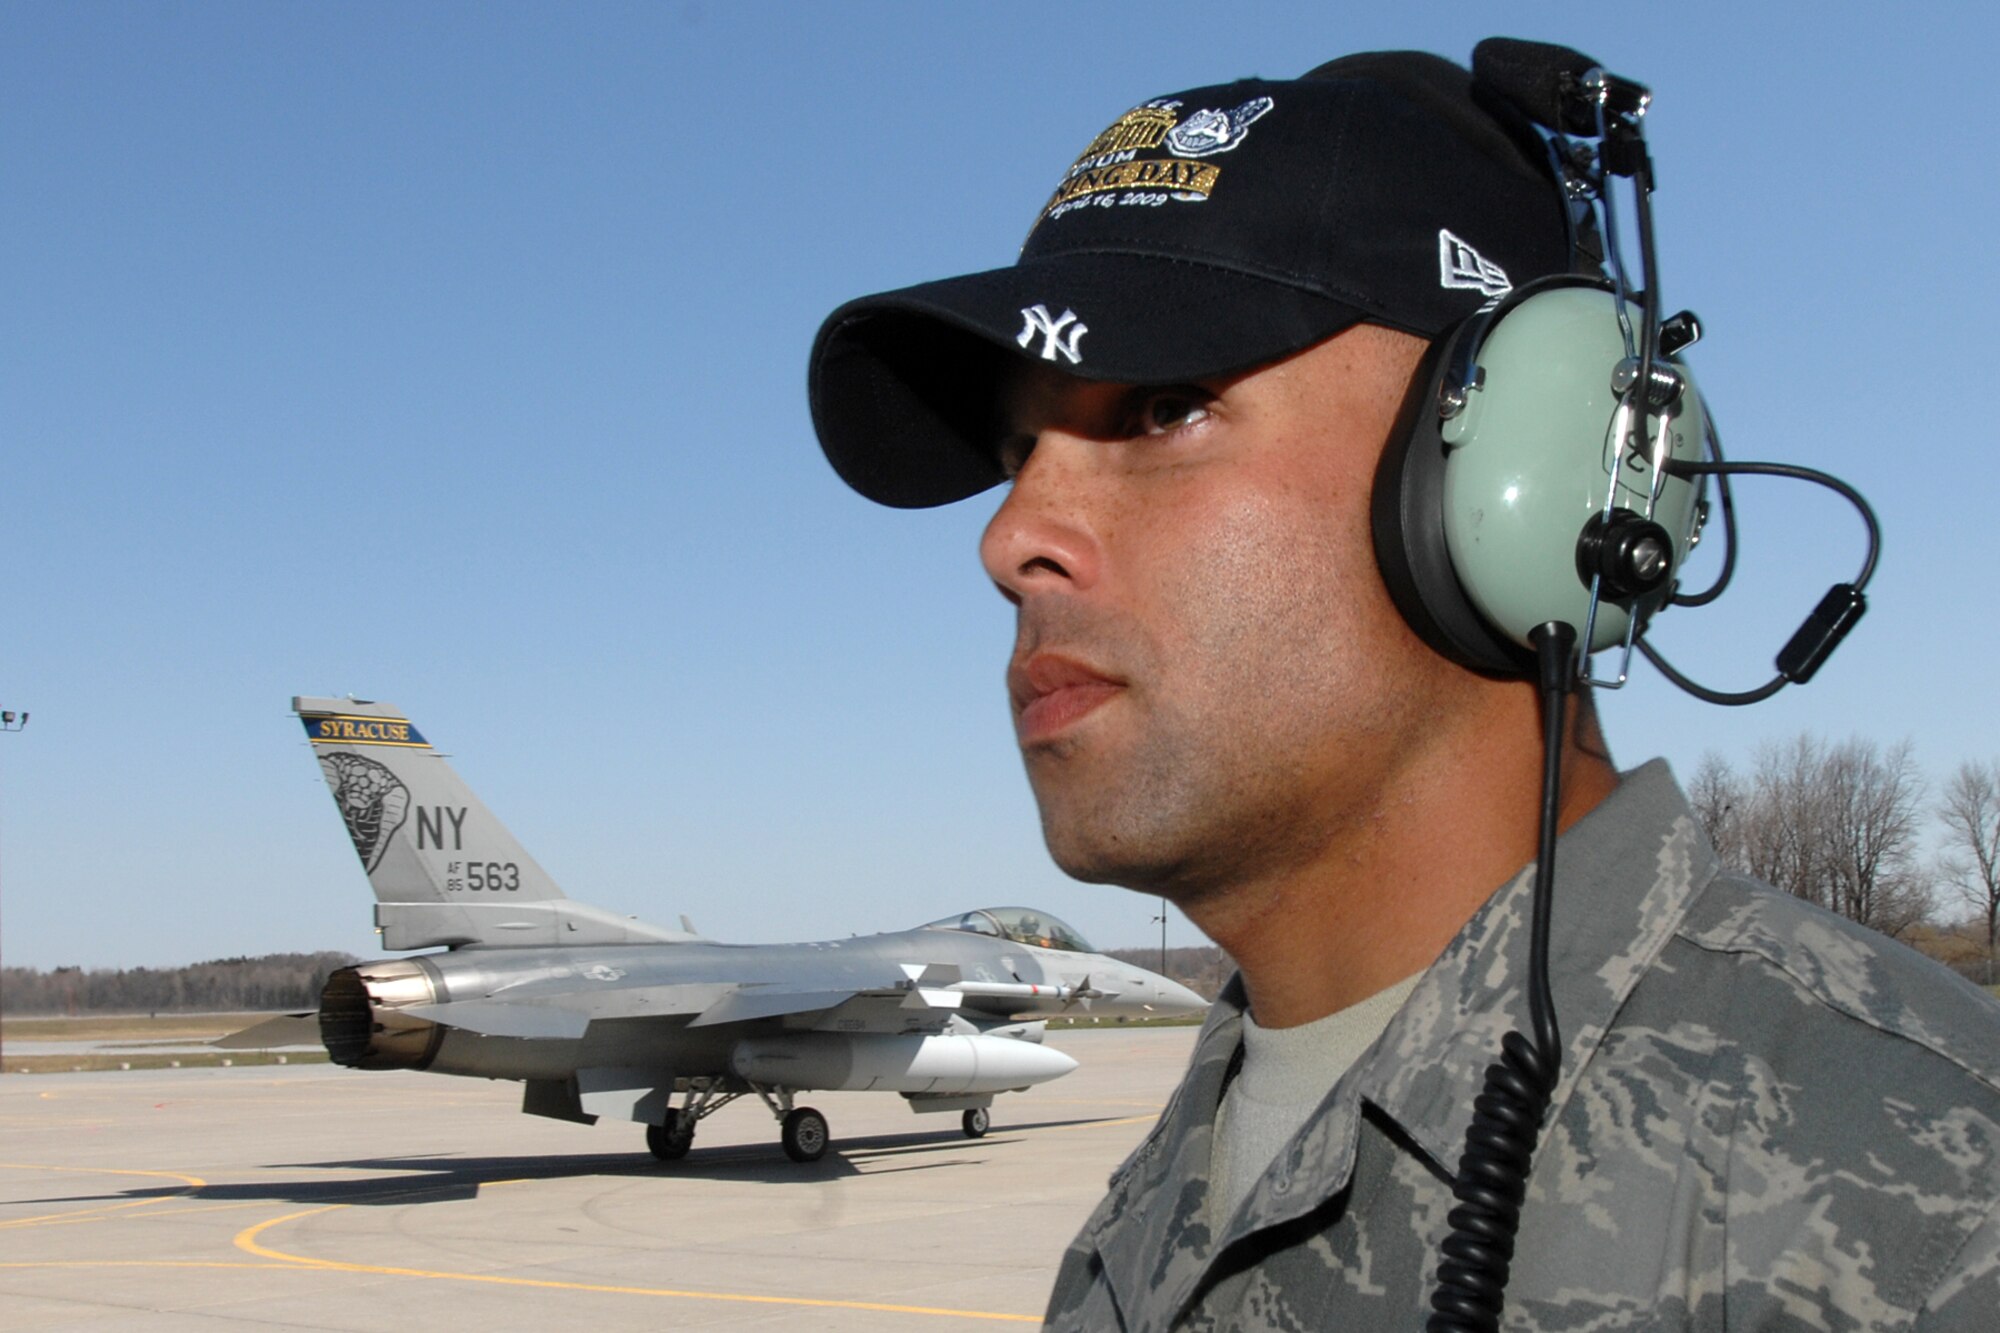 The 174th Fighter Wing, Syracuse NY, F-16C Fighting Falcon depart Hancock Field Air National Guard Base to take part in the 2009 "New" Yankee Stadium Opening Day Ceremonies. Staff Sgt. Preston Cox, 174 Fighter Wing Crew Chief watches the jets taxi out for their mission. (USAF Photo by: SSgt James N. Faso II)